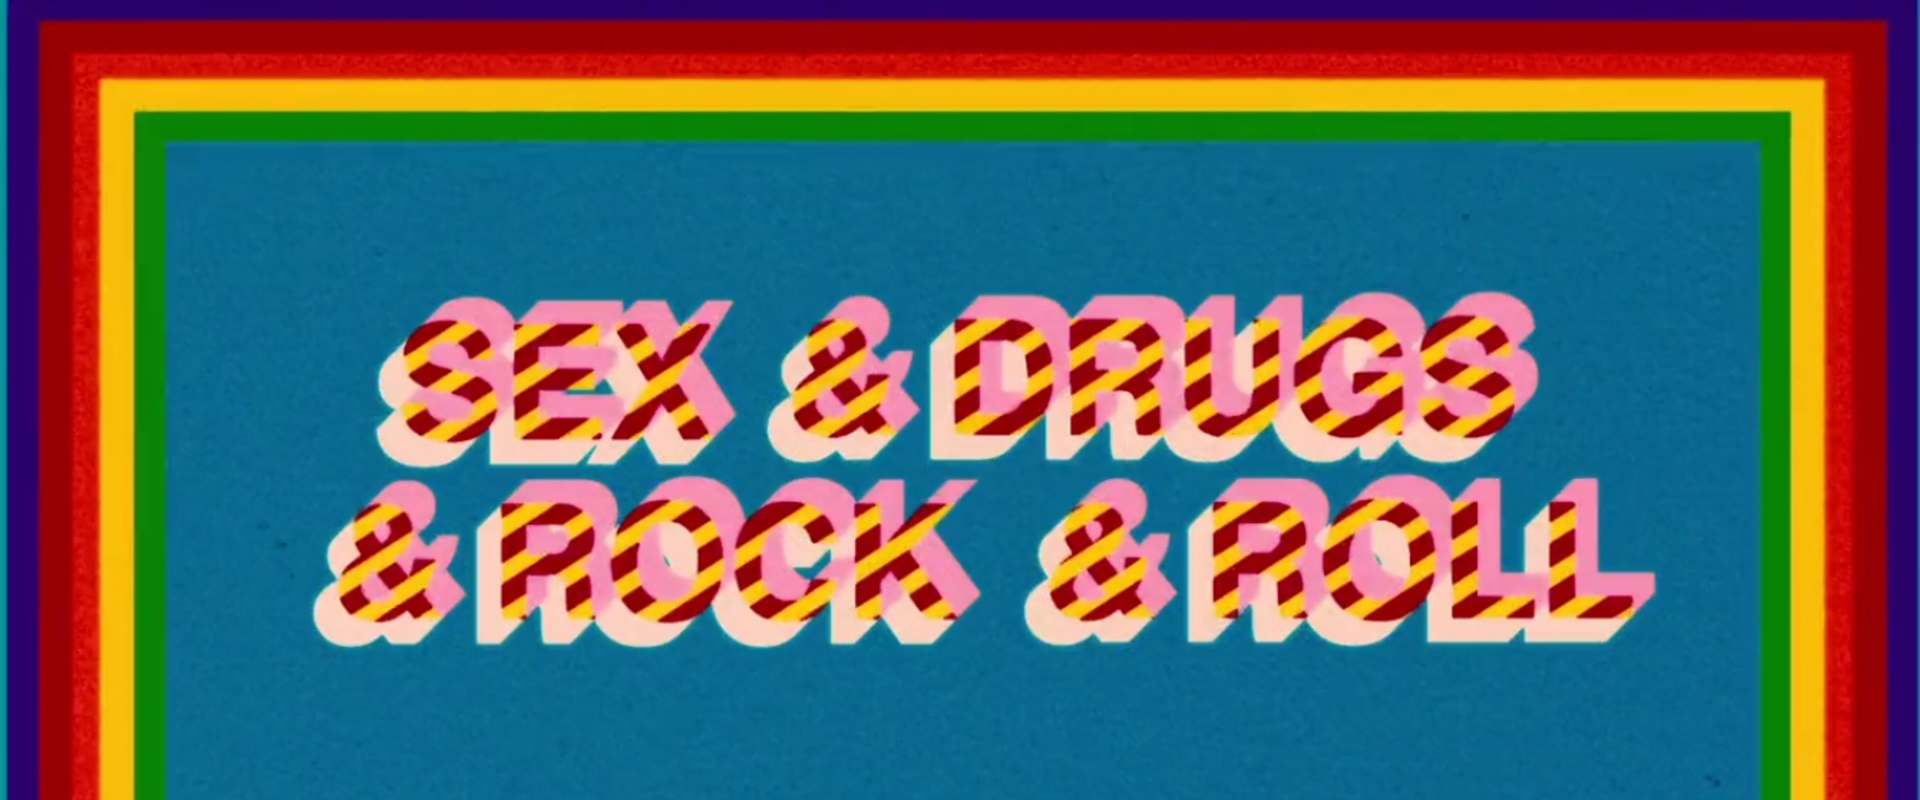 Sex & Drugs & Rock & Roll background 2